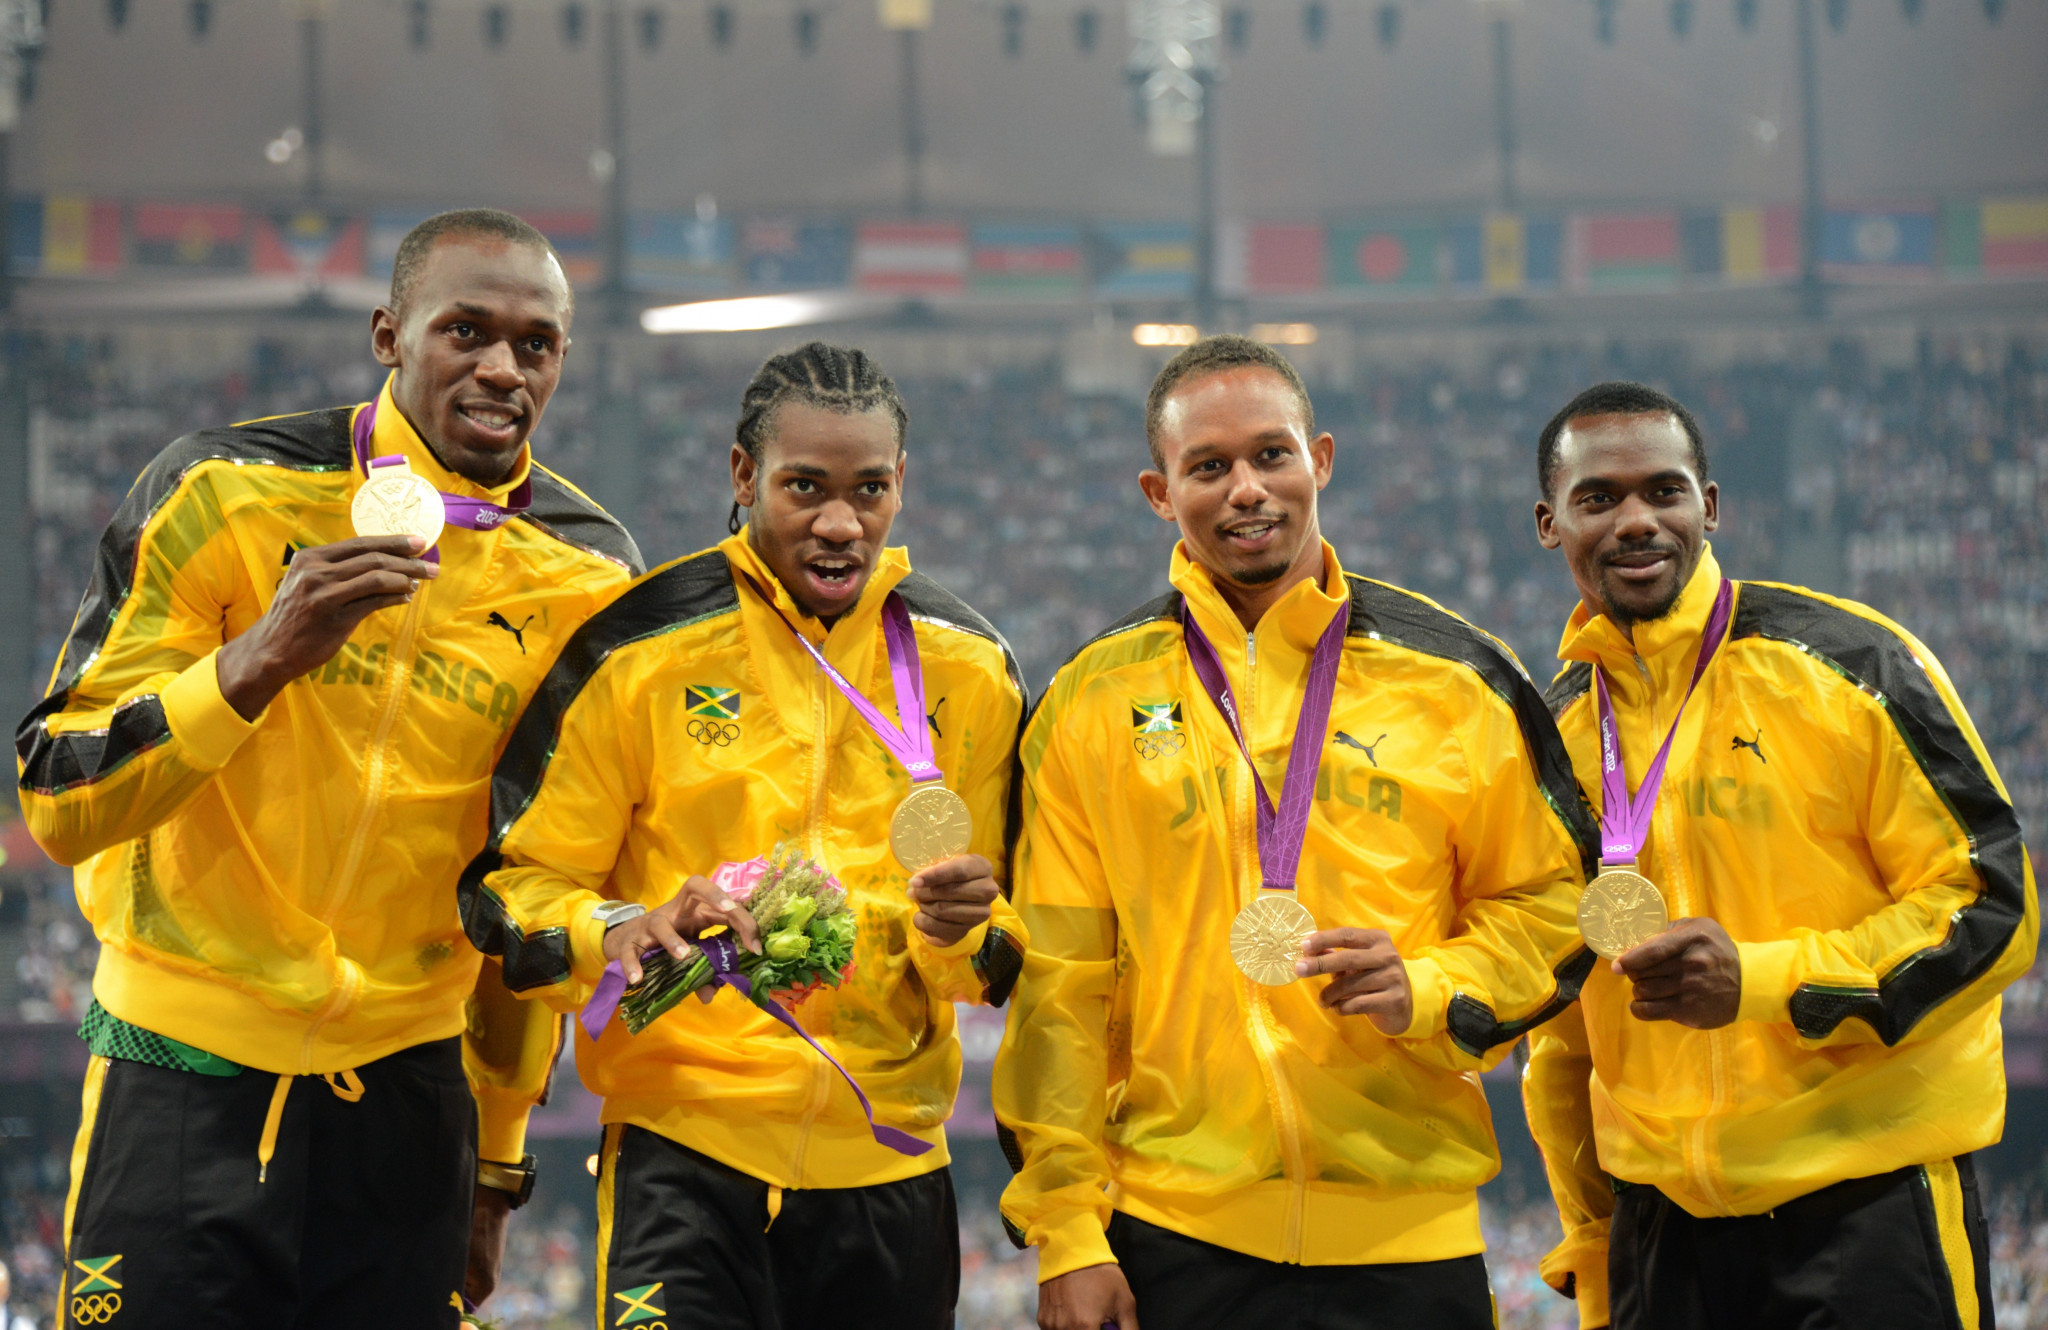 Yohan Blake, second left, has won two Olympic gold medals in the 4x100m, including at London 2012, where Jamaica set a world record that still stands ©Getty Images